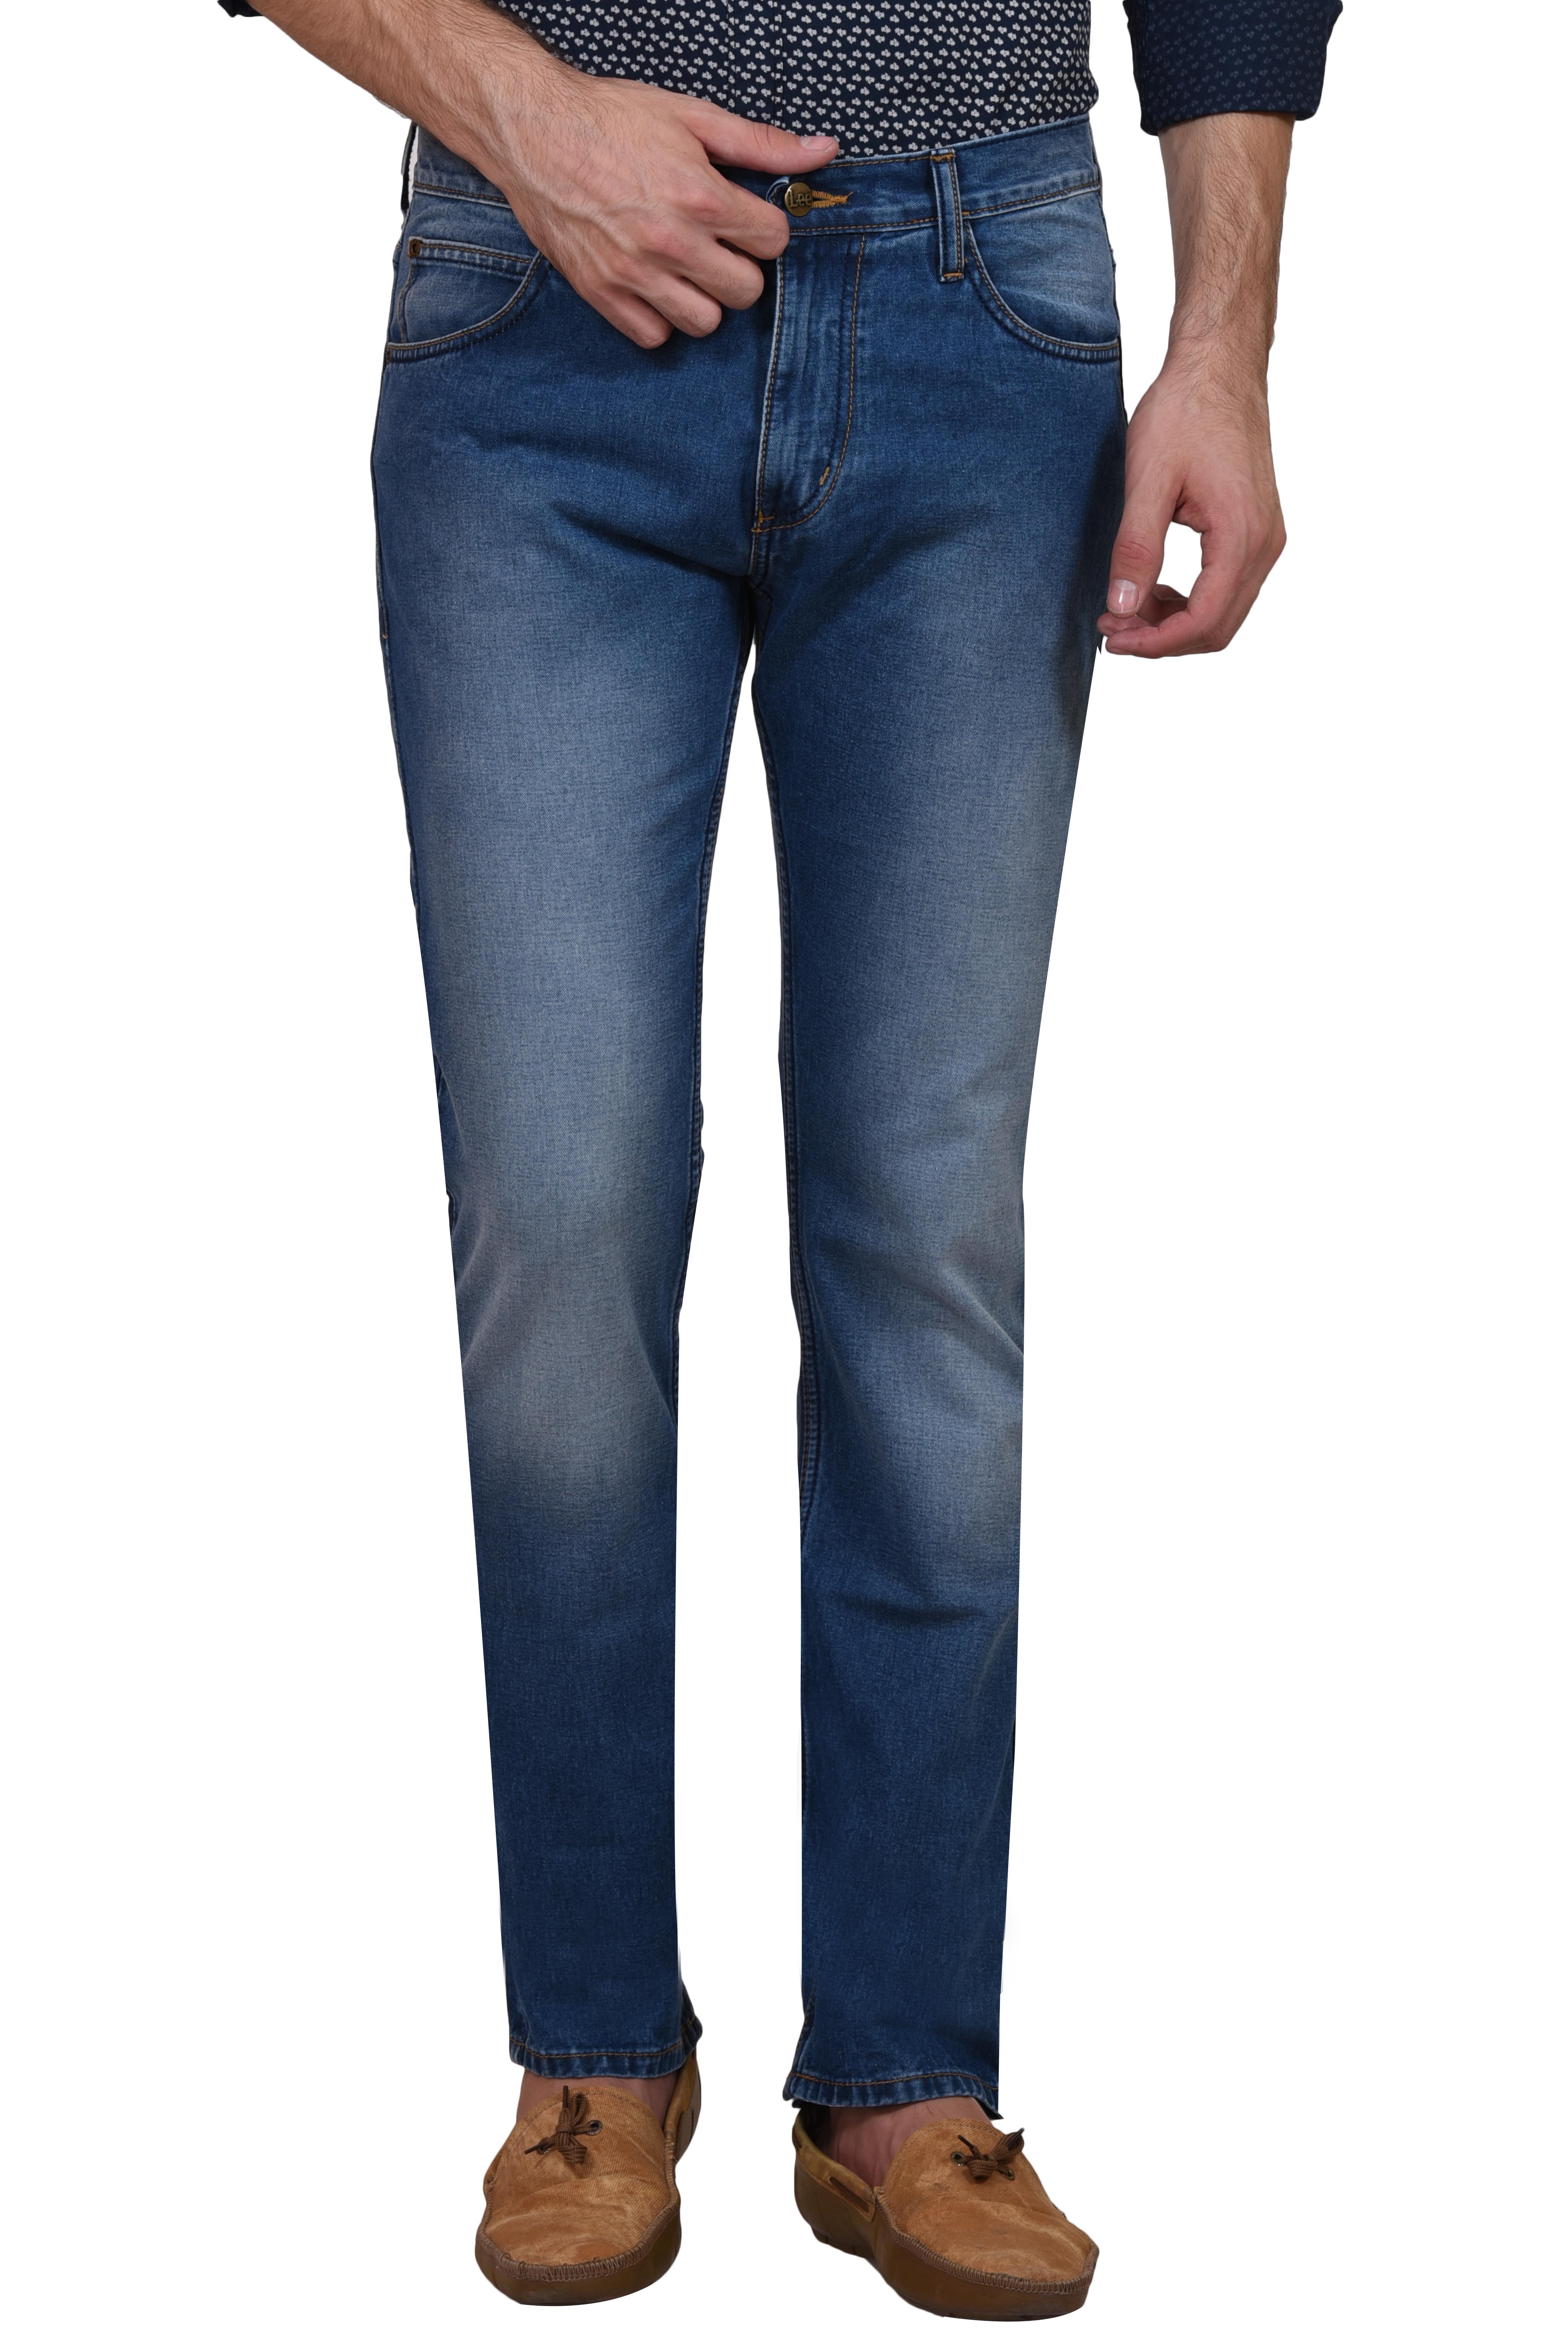 Buy Lee Navy Blue Slim Fit Mid Rise Mens Jeans Online @ ₹1379 from ...